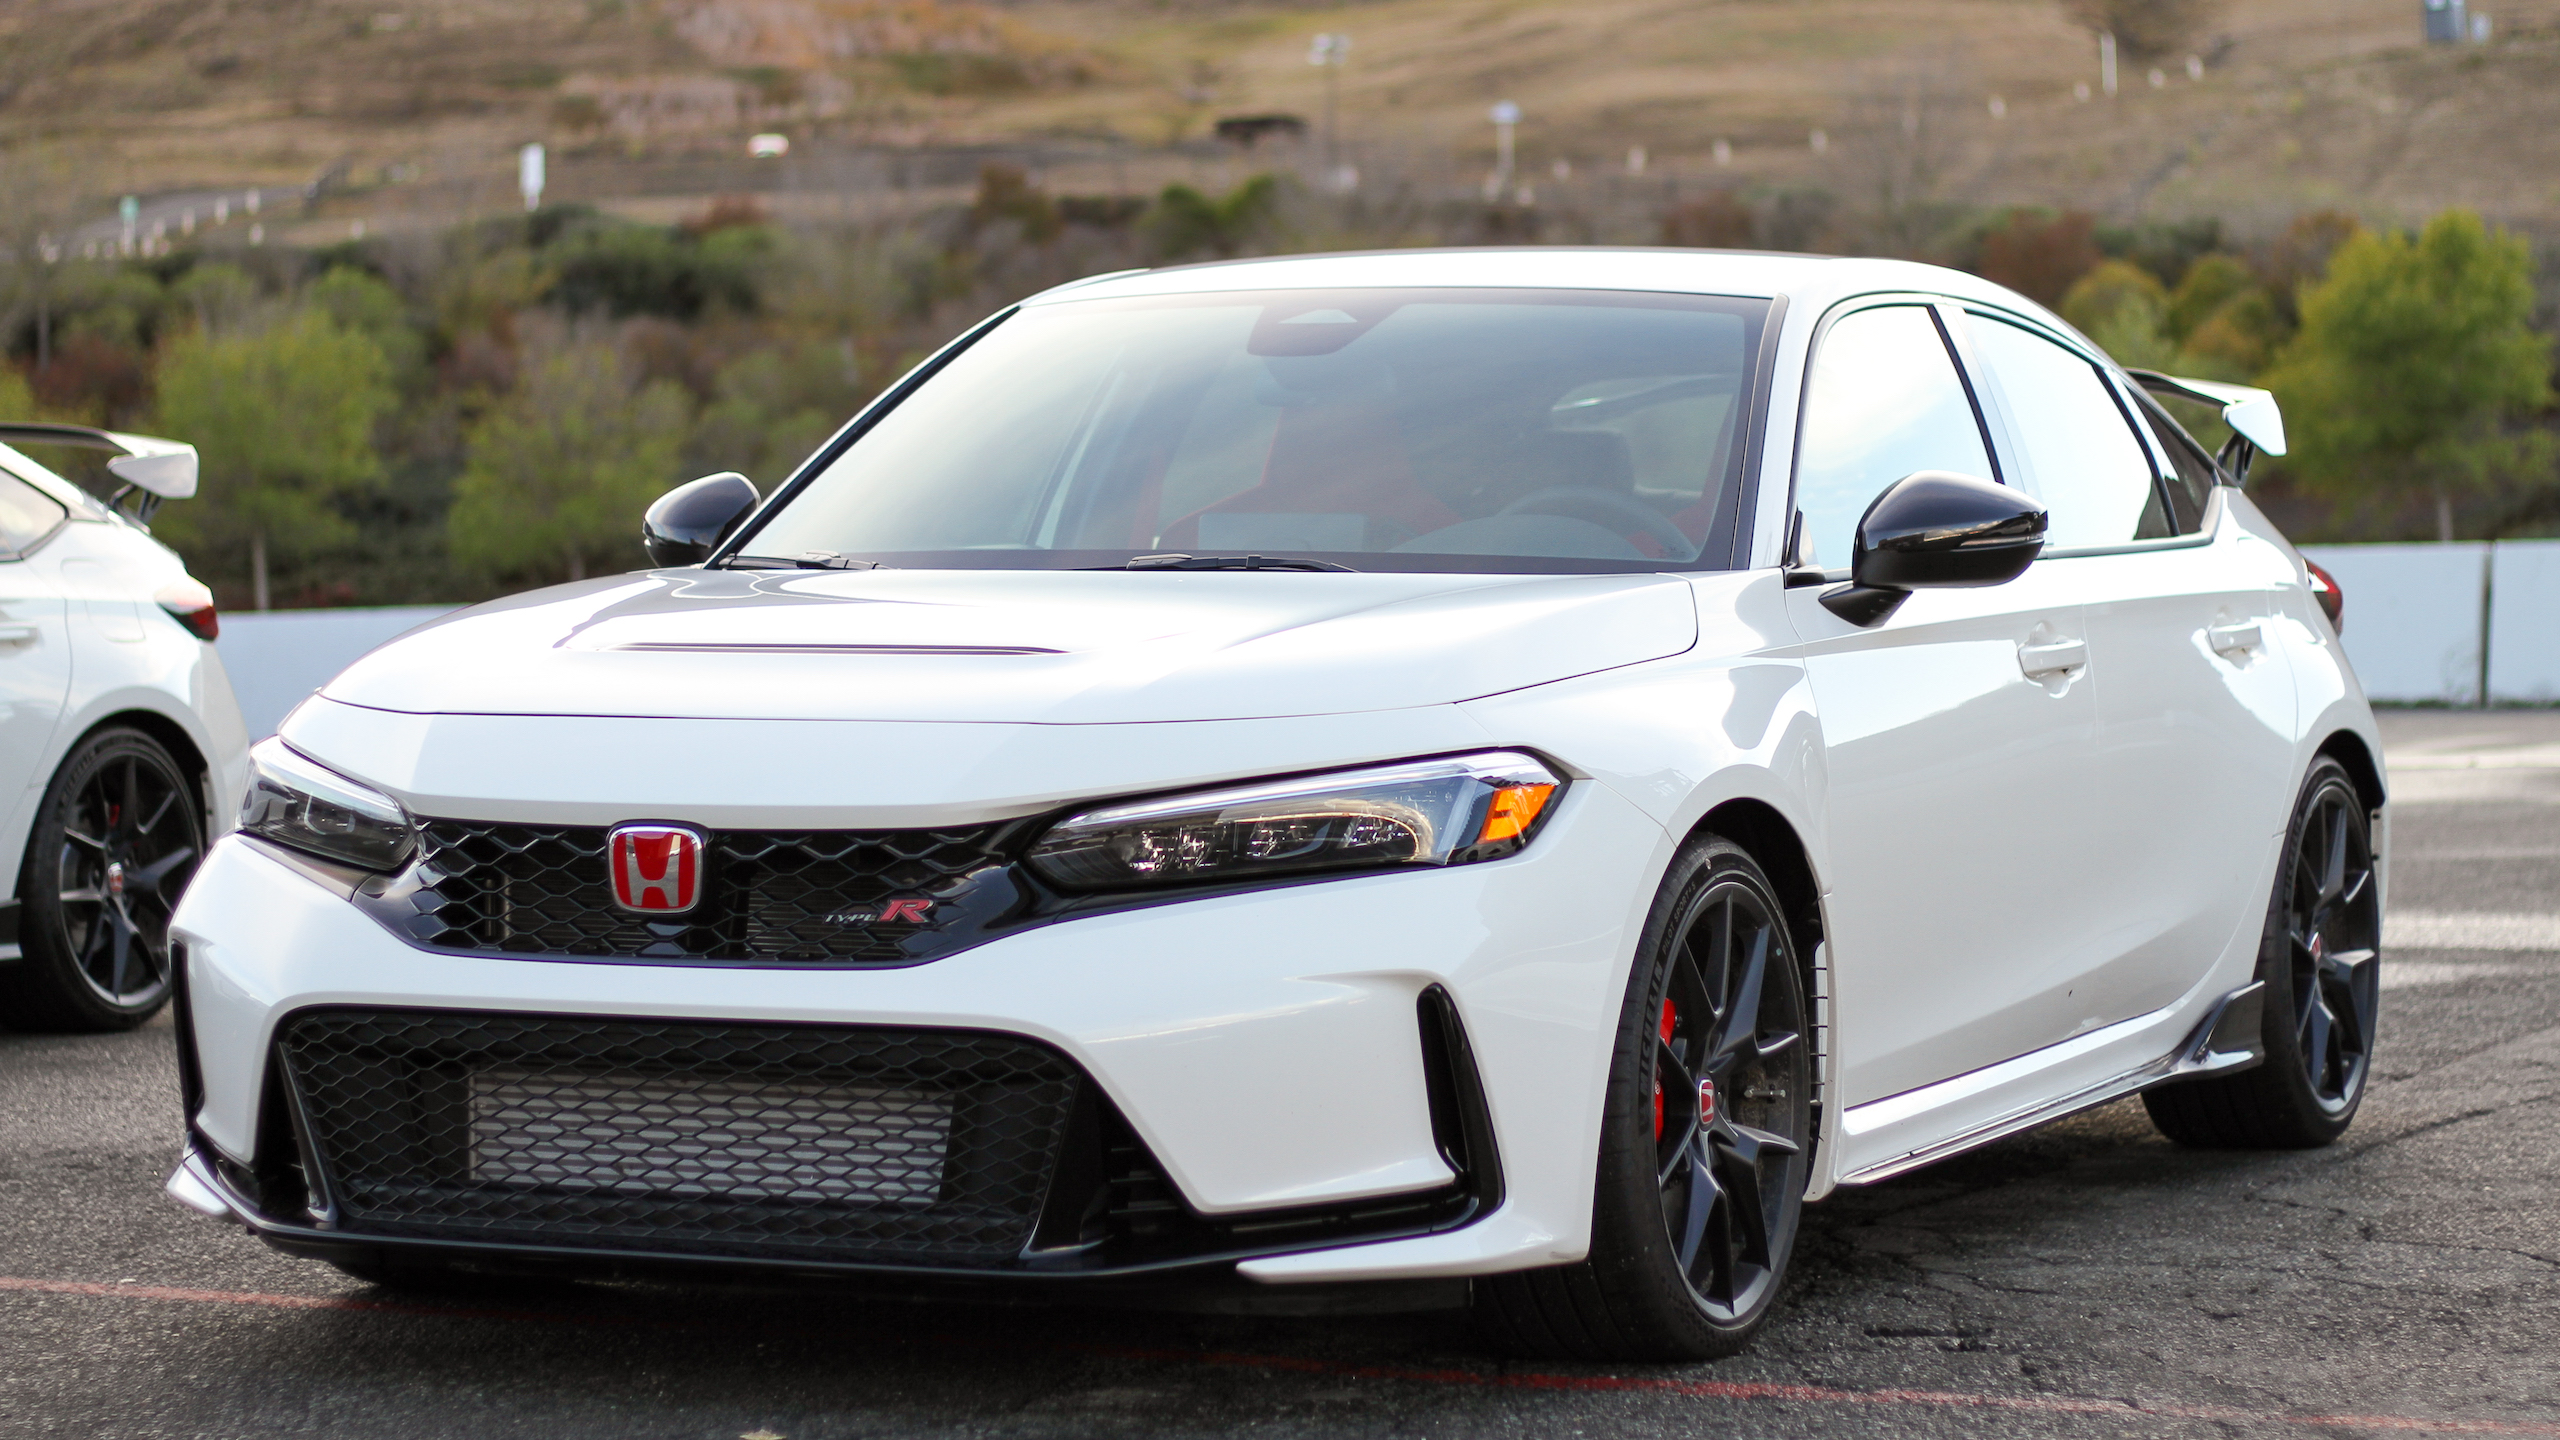 What We Know About the Upcoming 2022 Honda Civic Type R